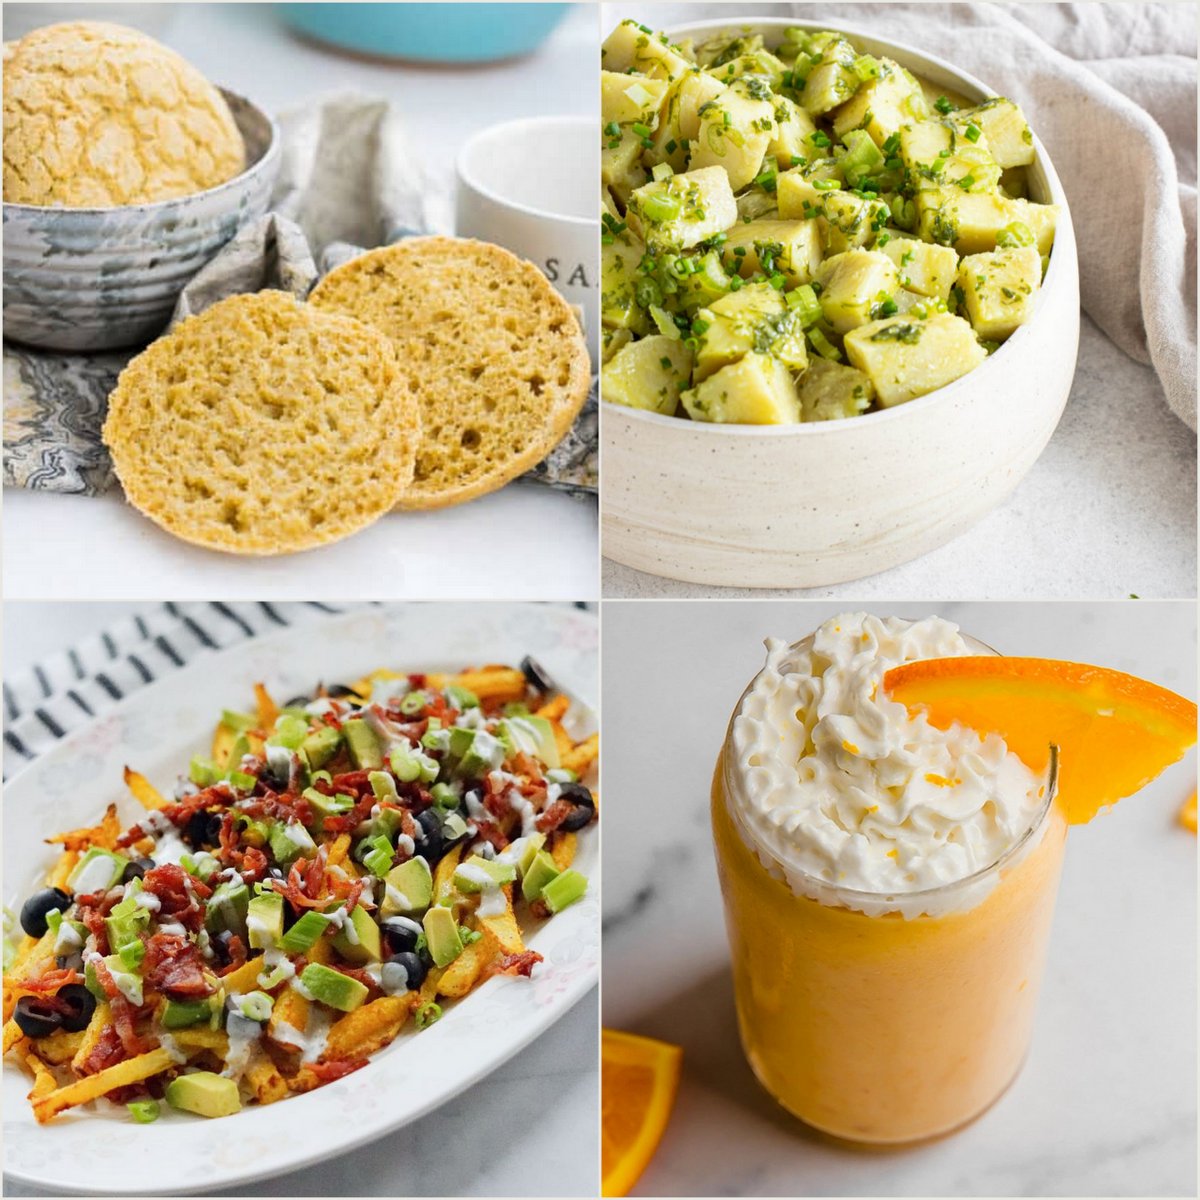 Paleo AIP Recipe Roundtable #378 | Phoenix Helix - *Featured Recipes: AIP English Muffins, Herbed "Potato" Salad, Loaded Air Fryer Jicama Fries, and Healthy Orange Creamsicle Smoothie.